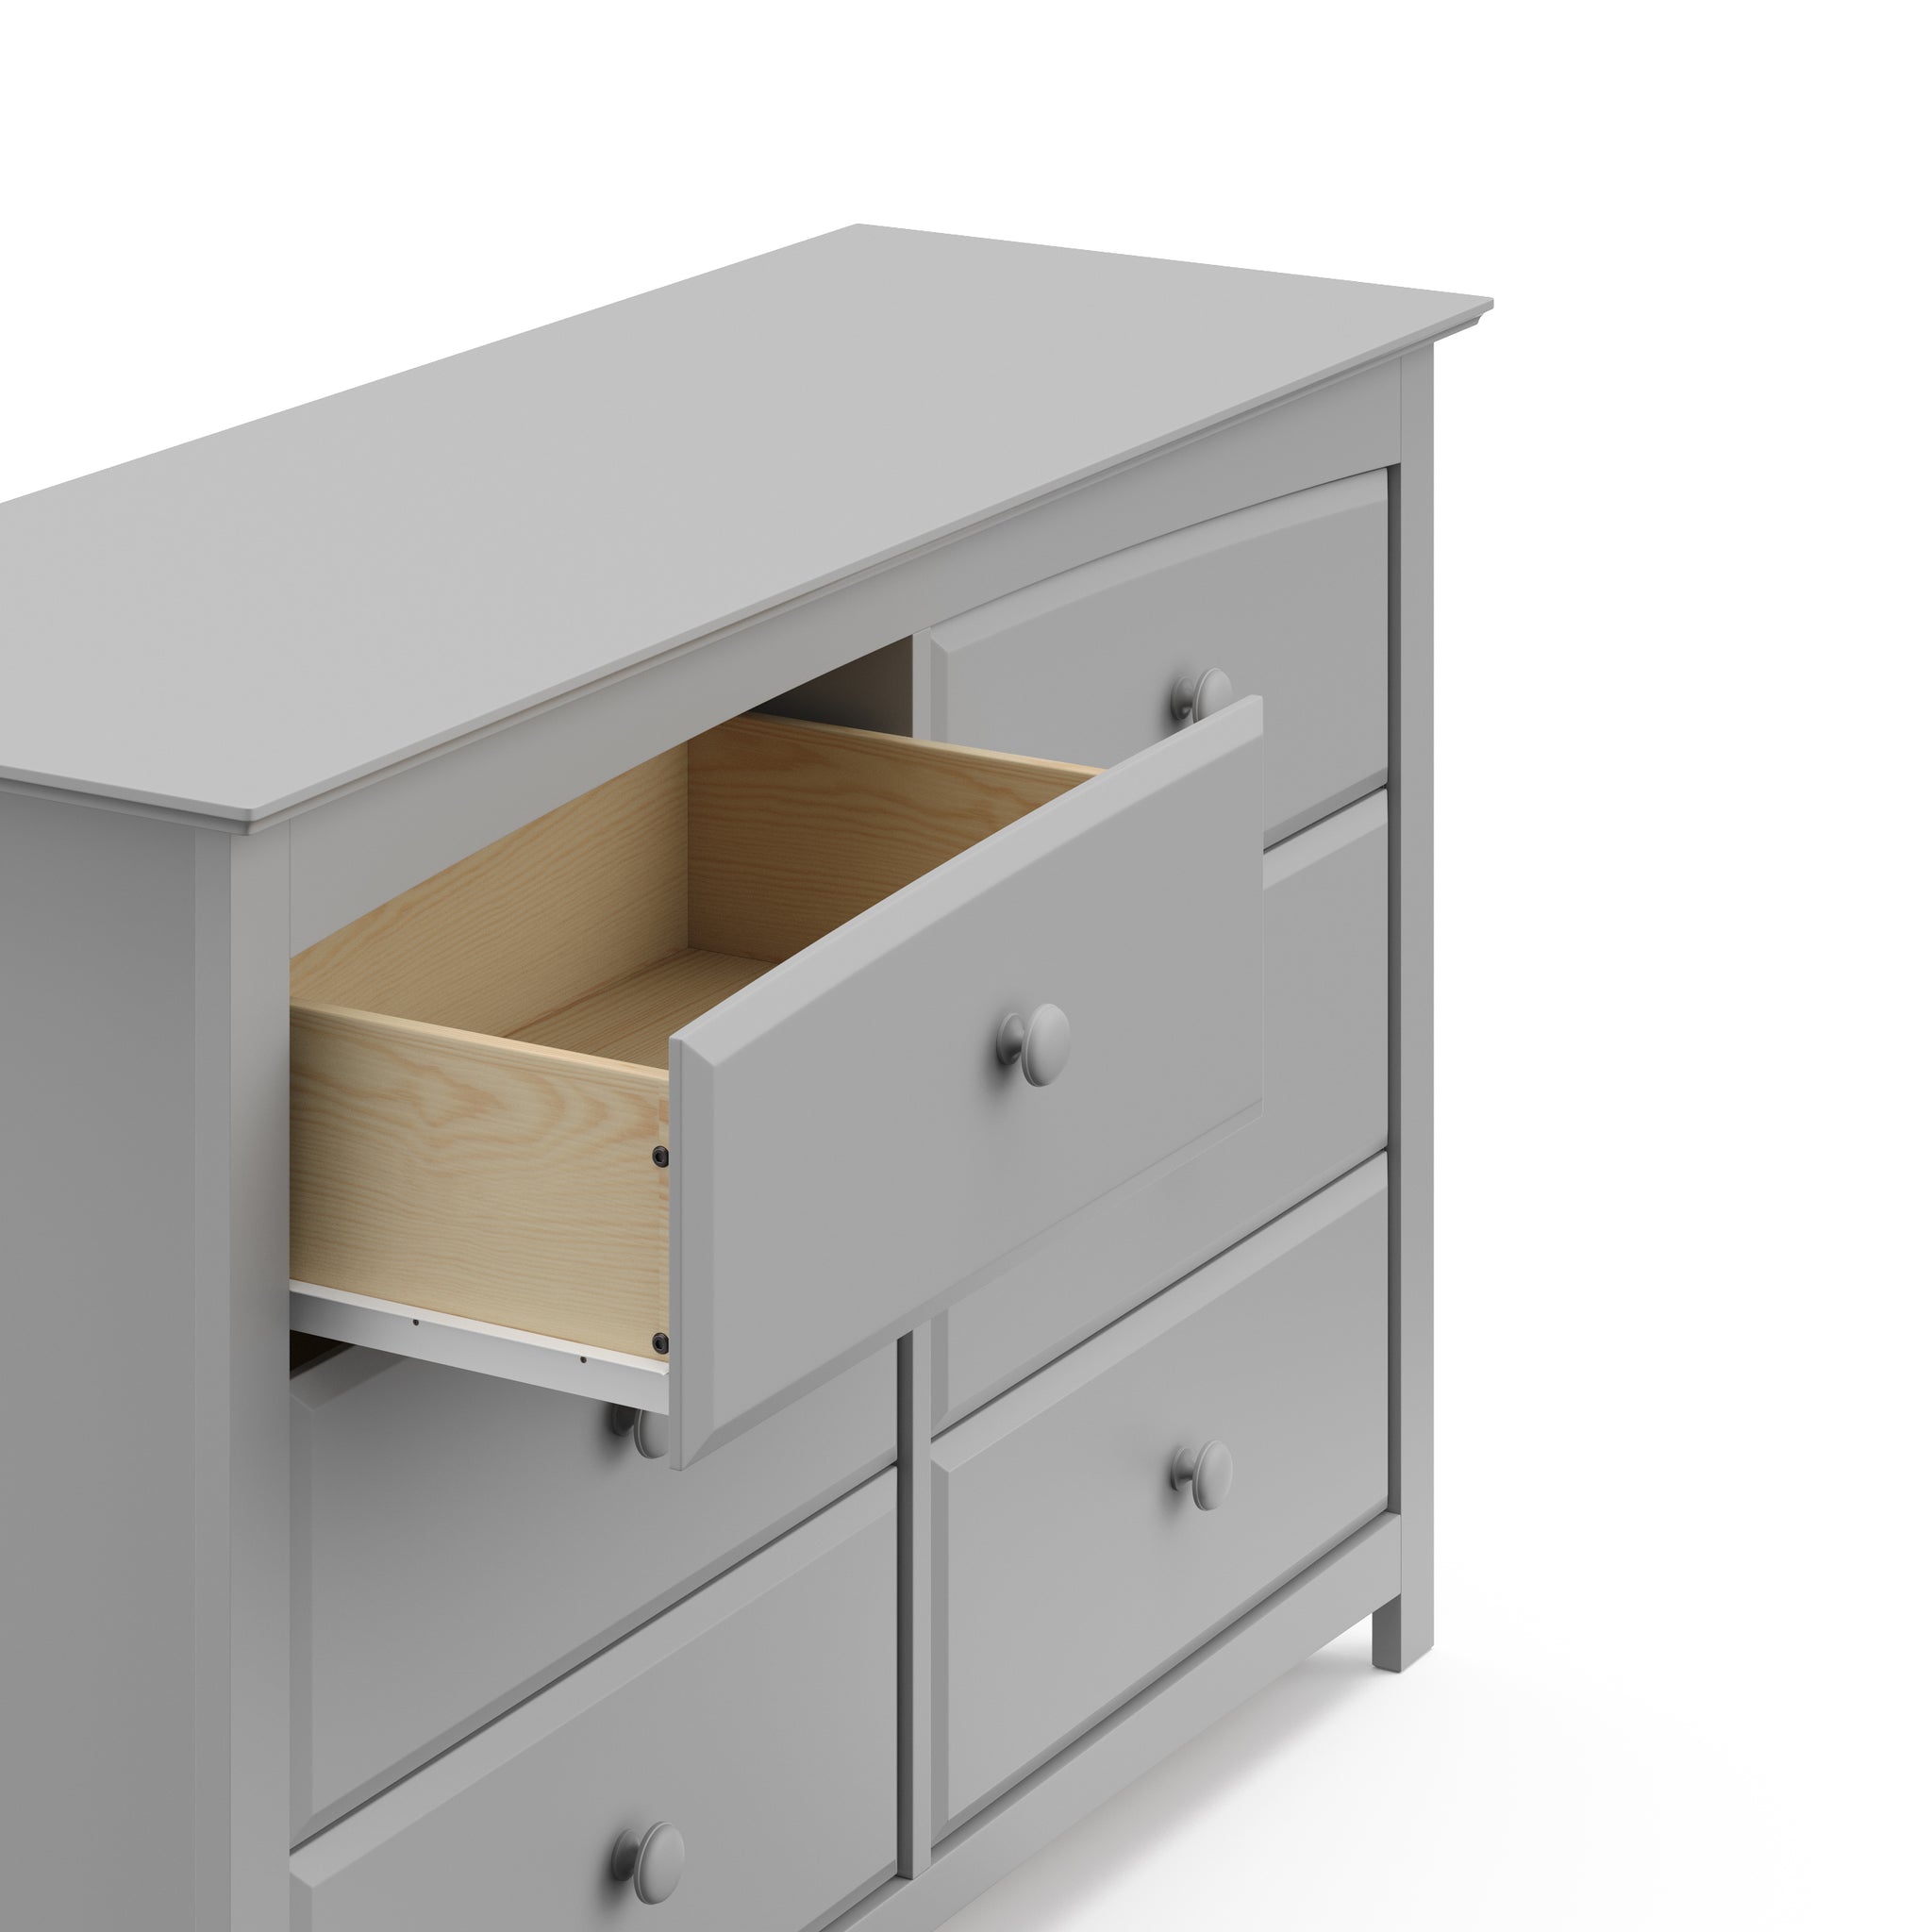 Pebble gray 6 drawer dresser with open drawer close-up view